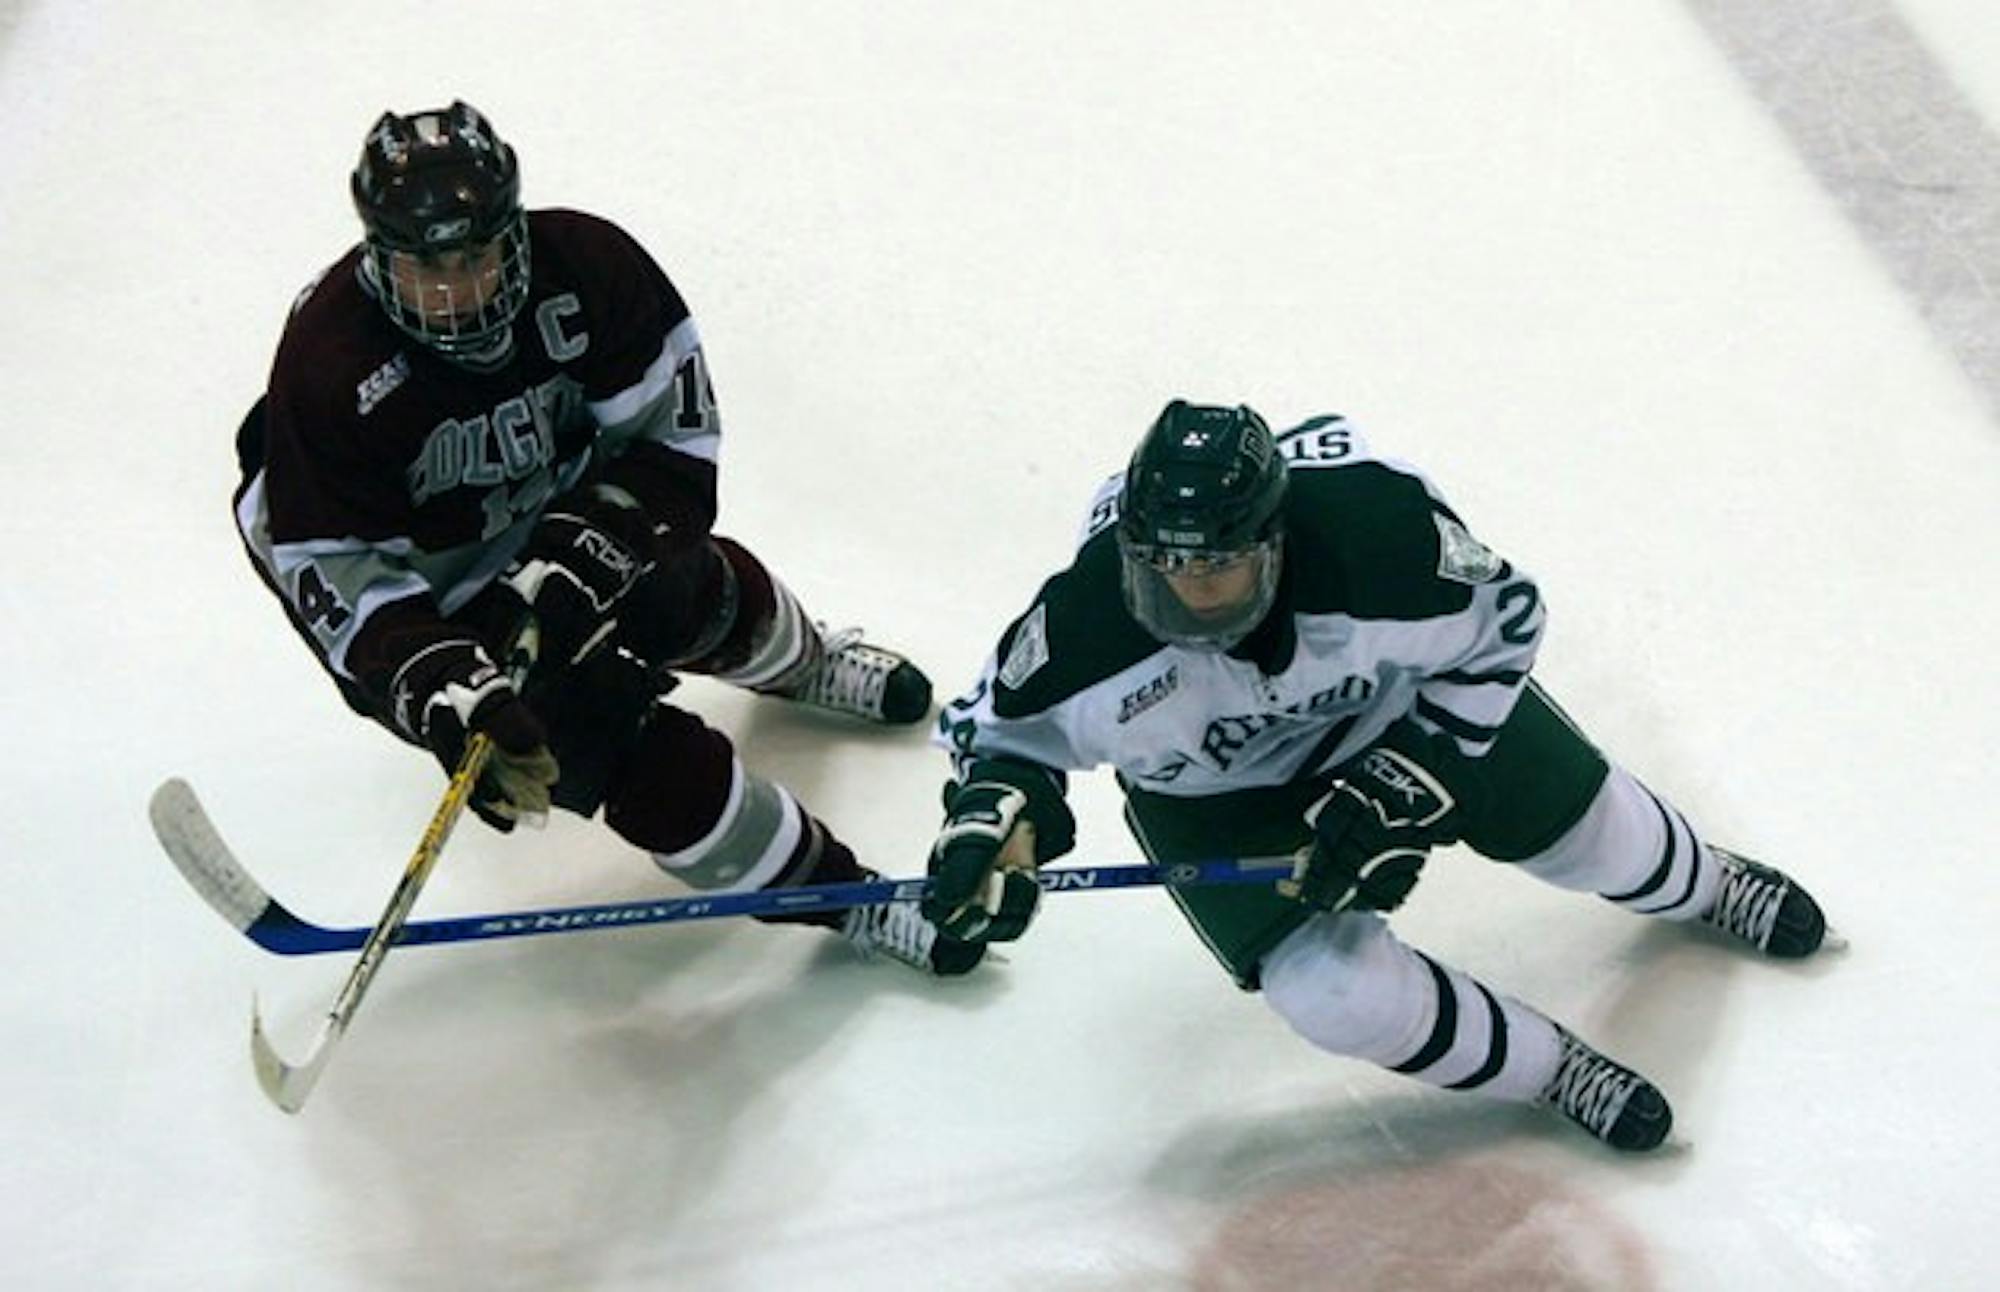 The Big Green men's hockey team refound its groove in a 5-1 thumping of Bentley at home on Saturday.